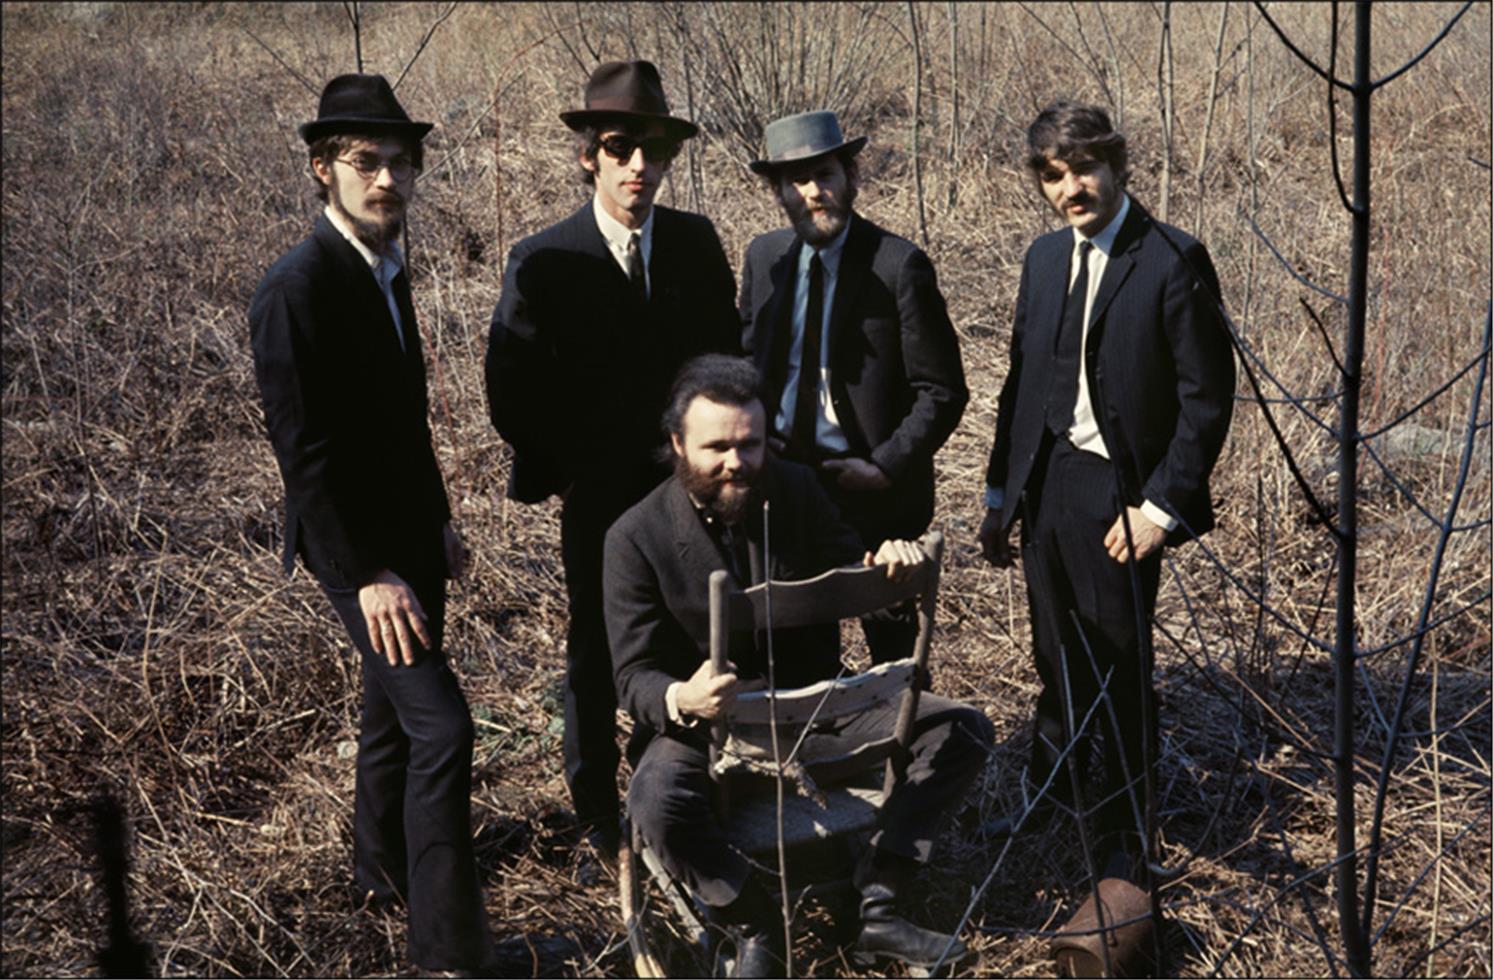 Elliott Landy Portrait Photograph - The Band, outtake from Music From Big Pink shoot, NY, 1968.